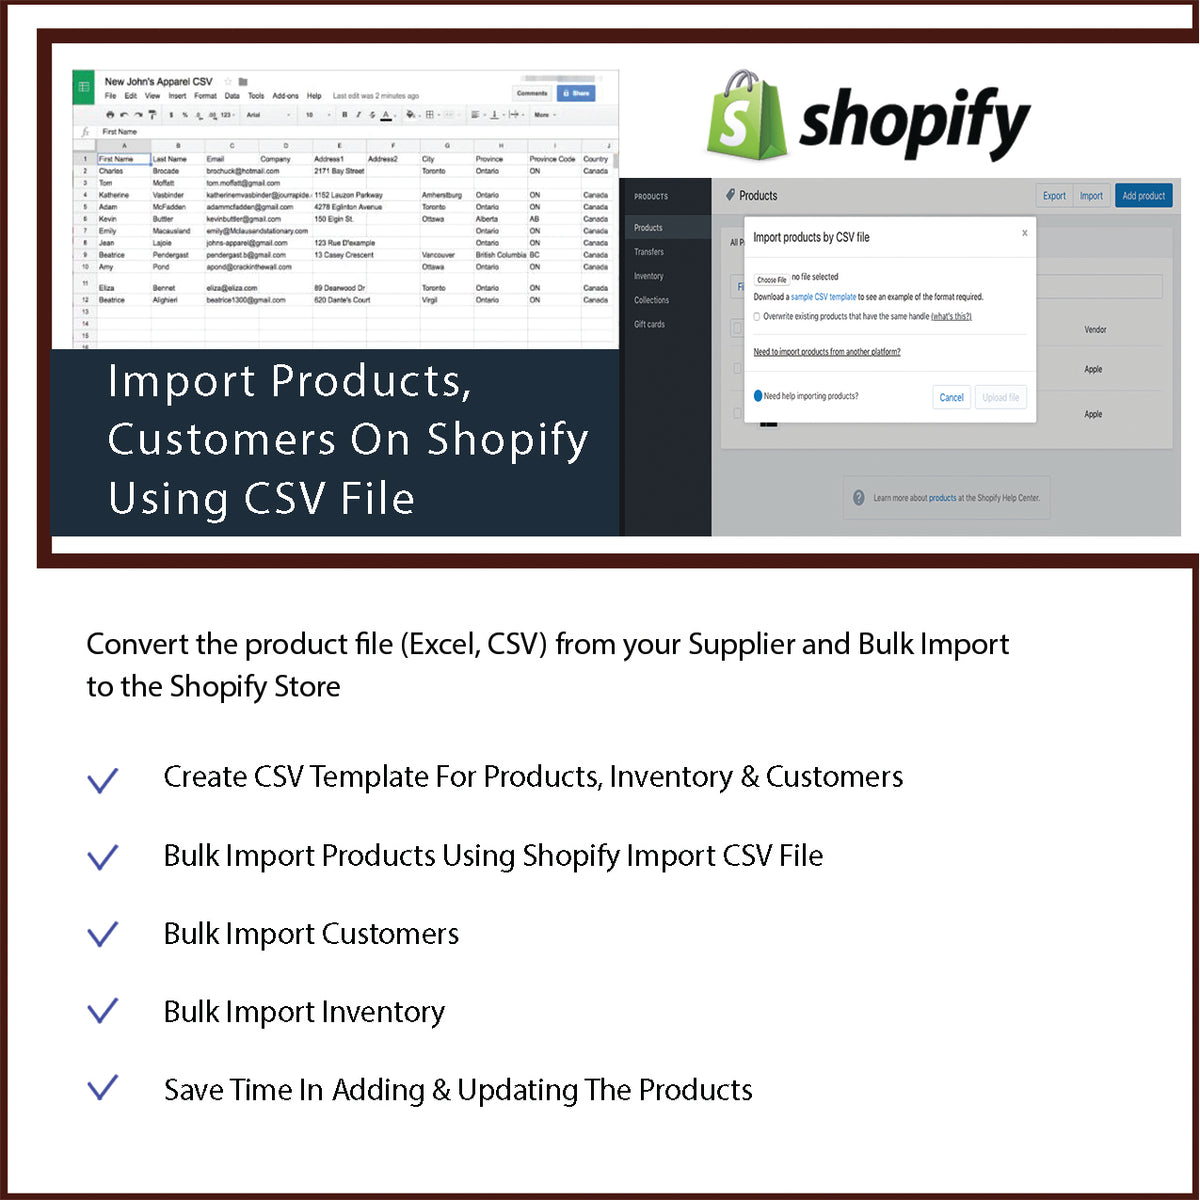 Import Products, Customers & Inventory On Shopify Using CSV File